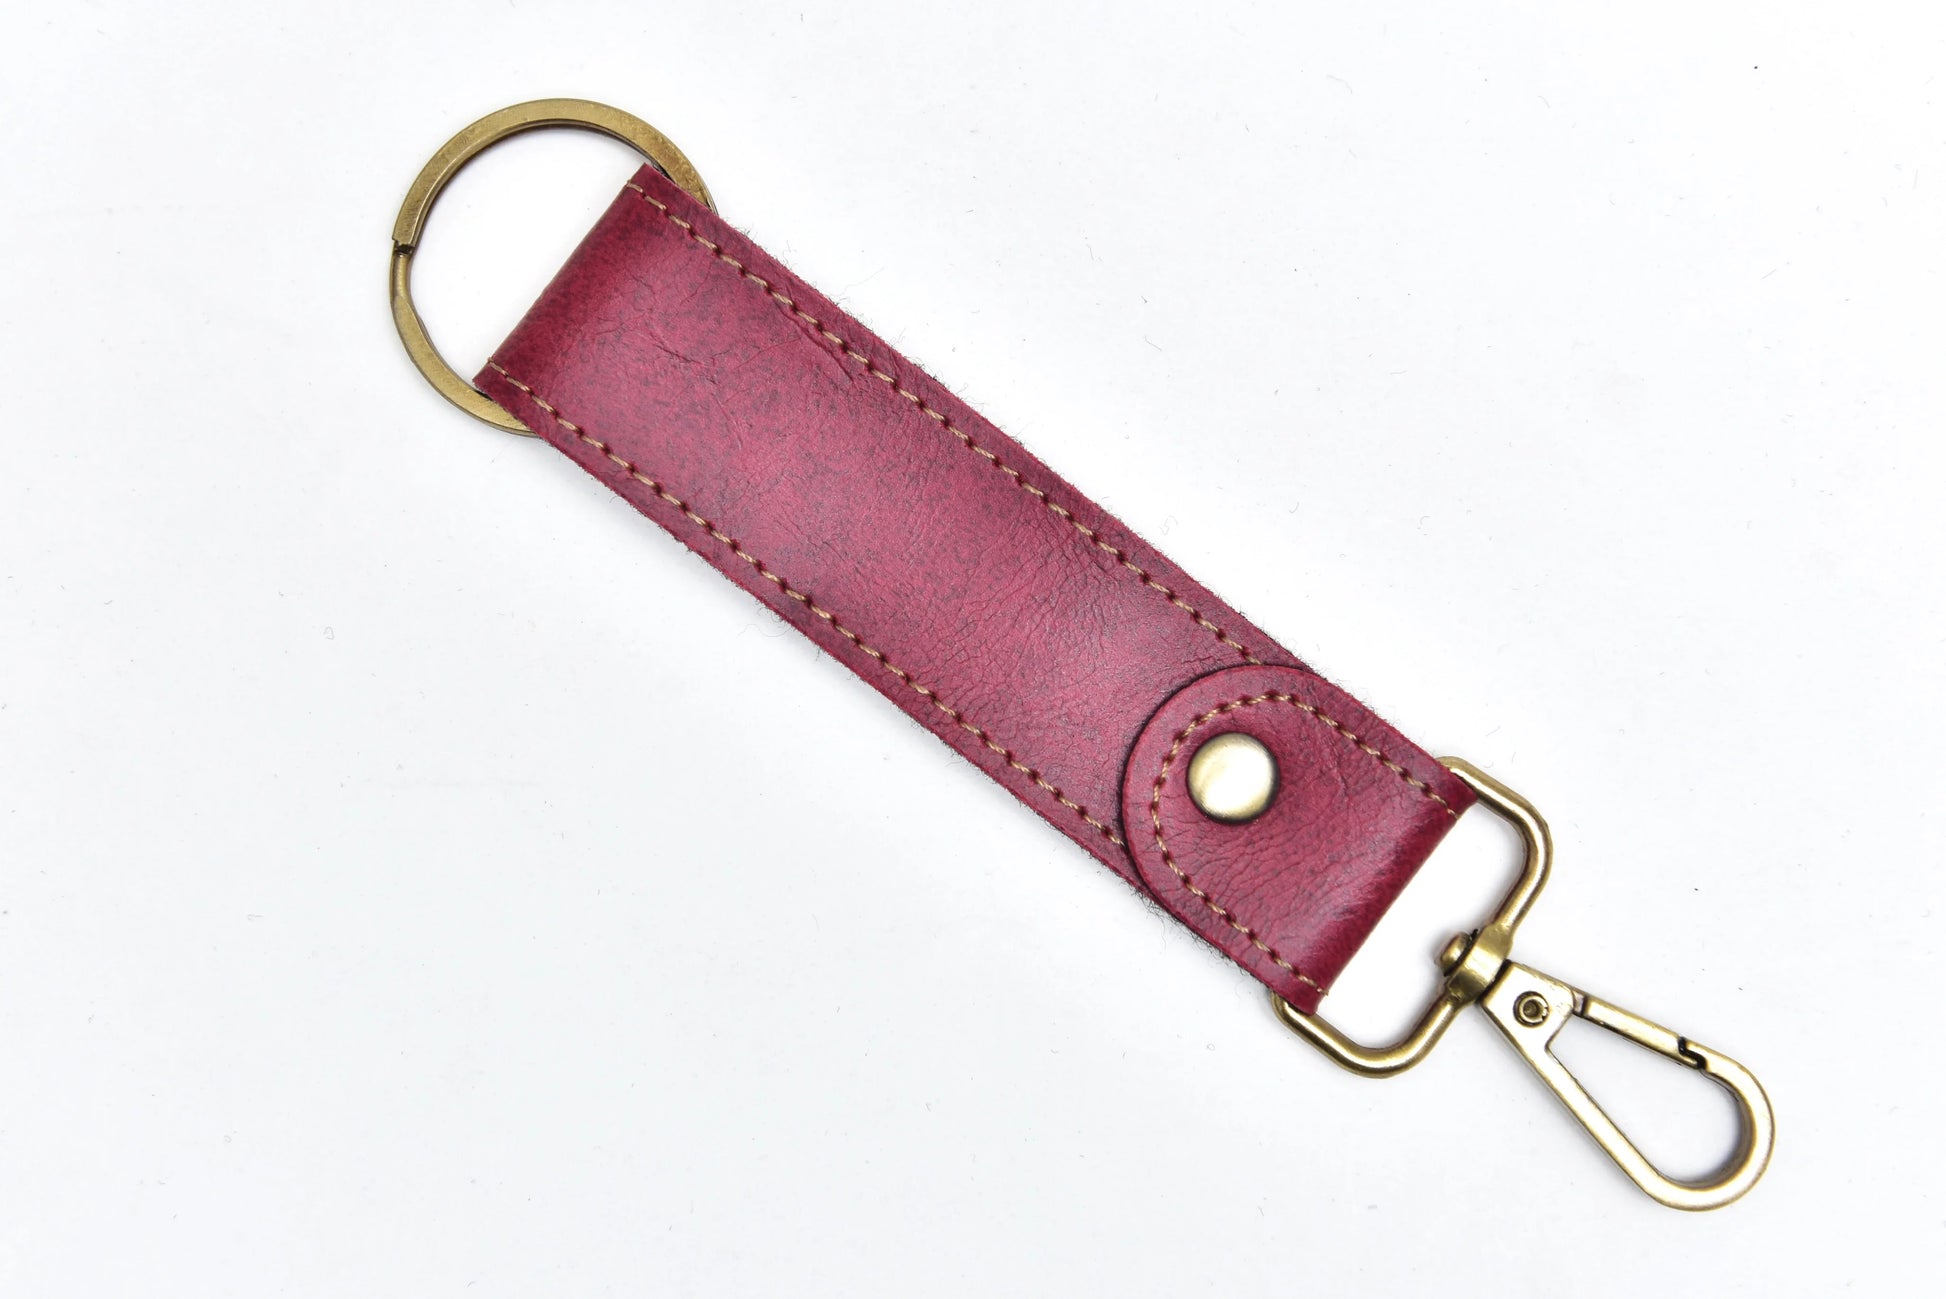 The sleek, modern design of this leather keychain adds a touch of sophistication to your everyday carry.